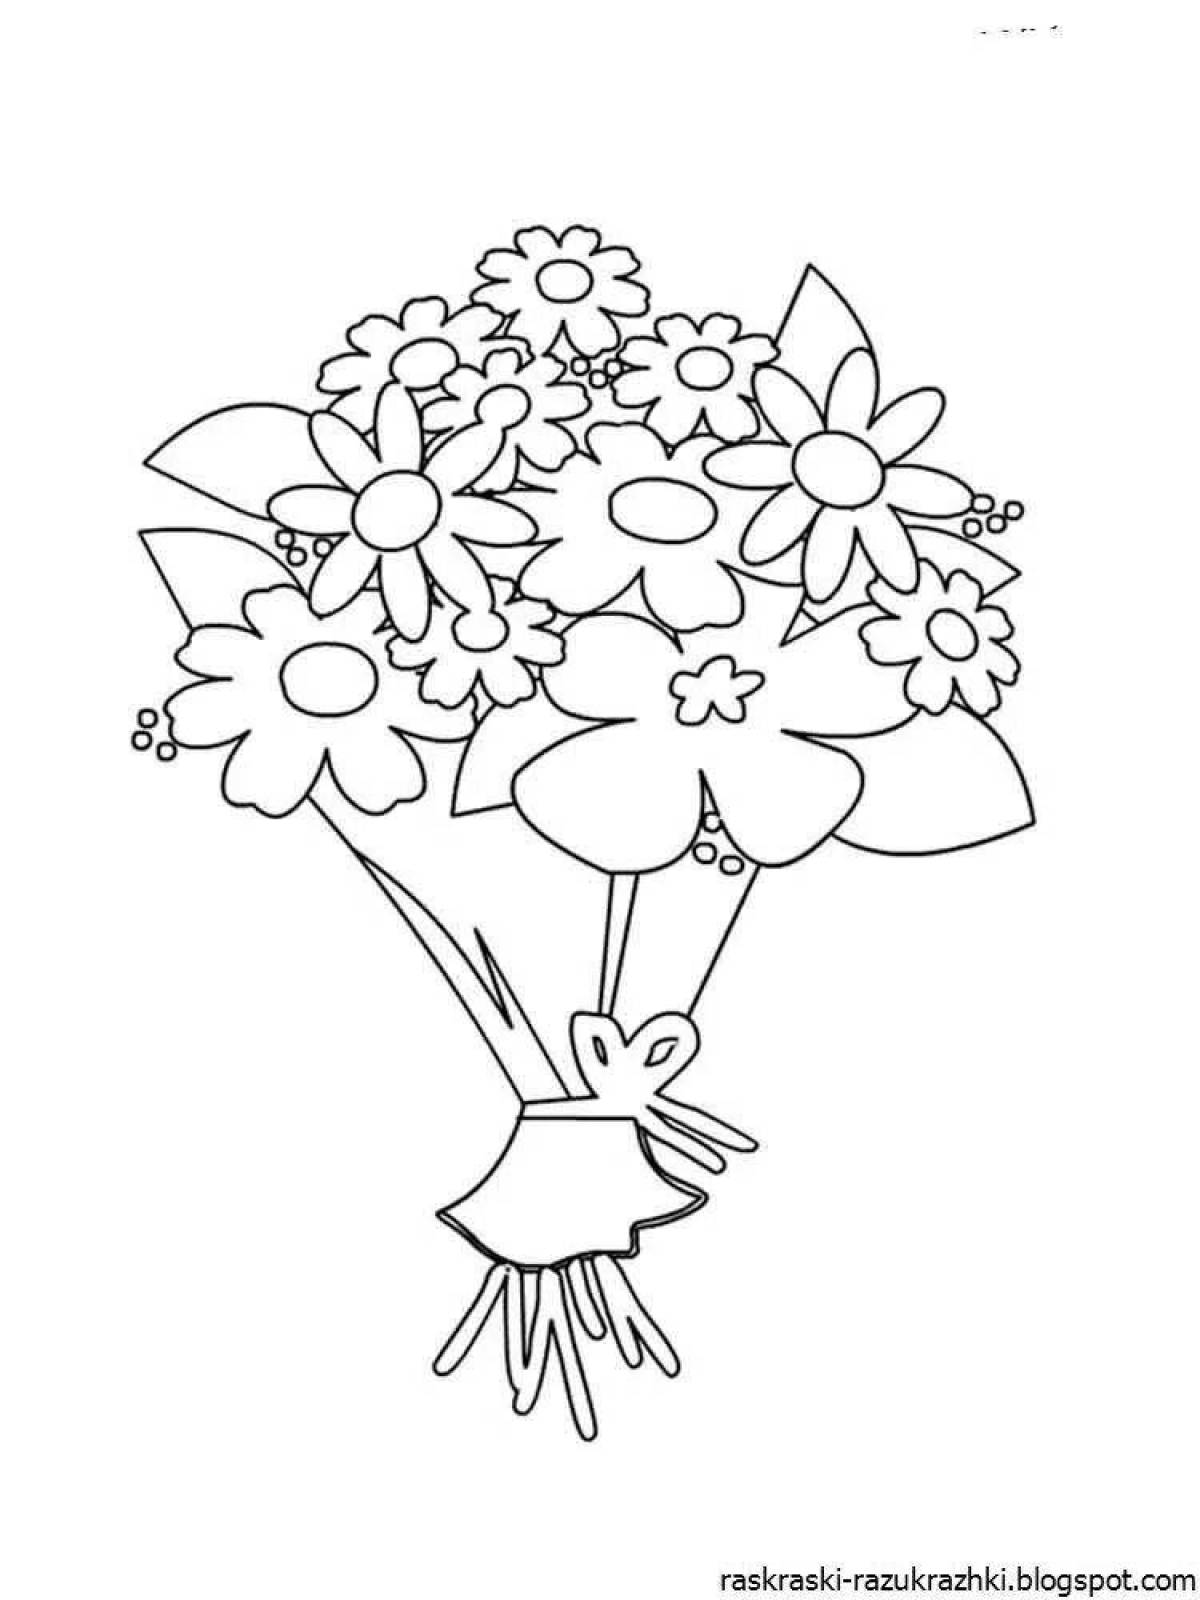 Adorable baby bouquet coloring page